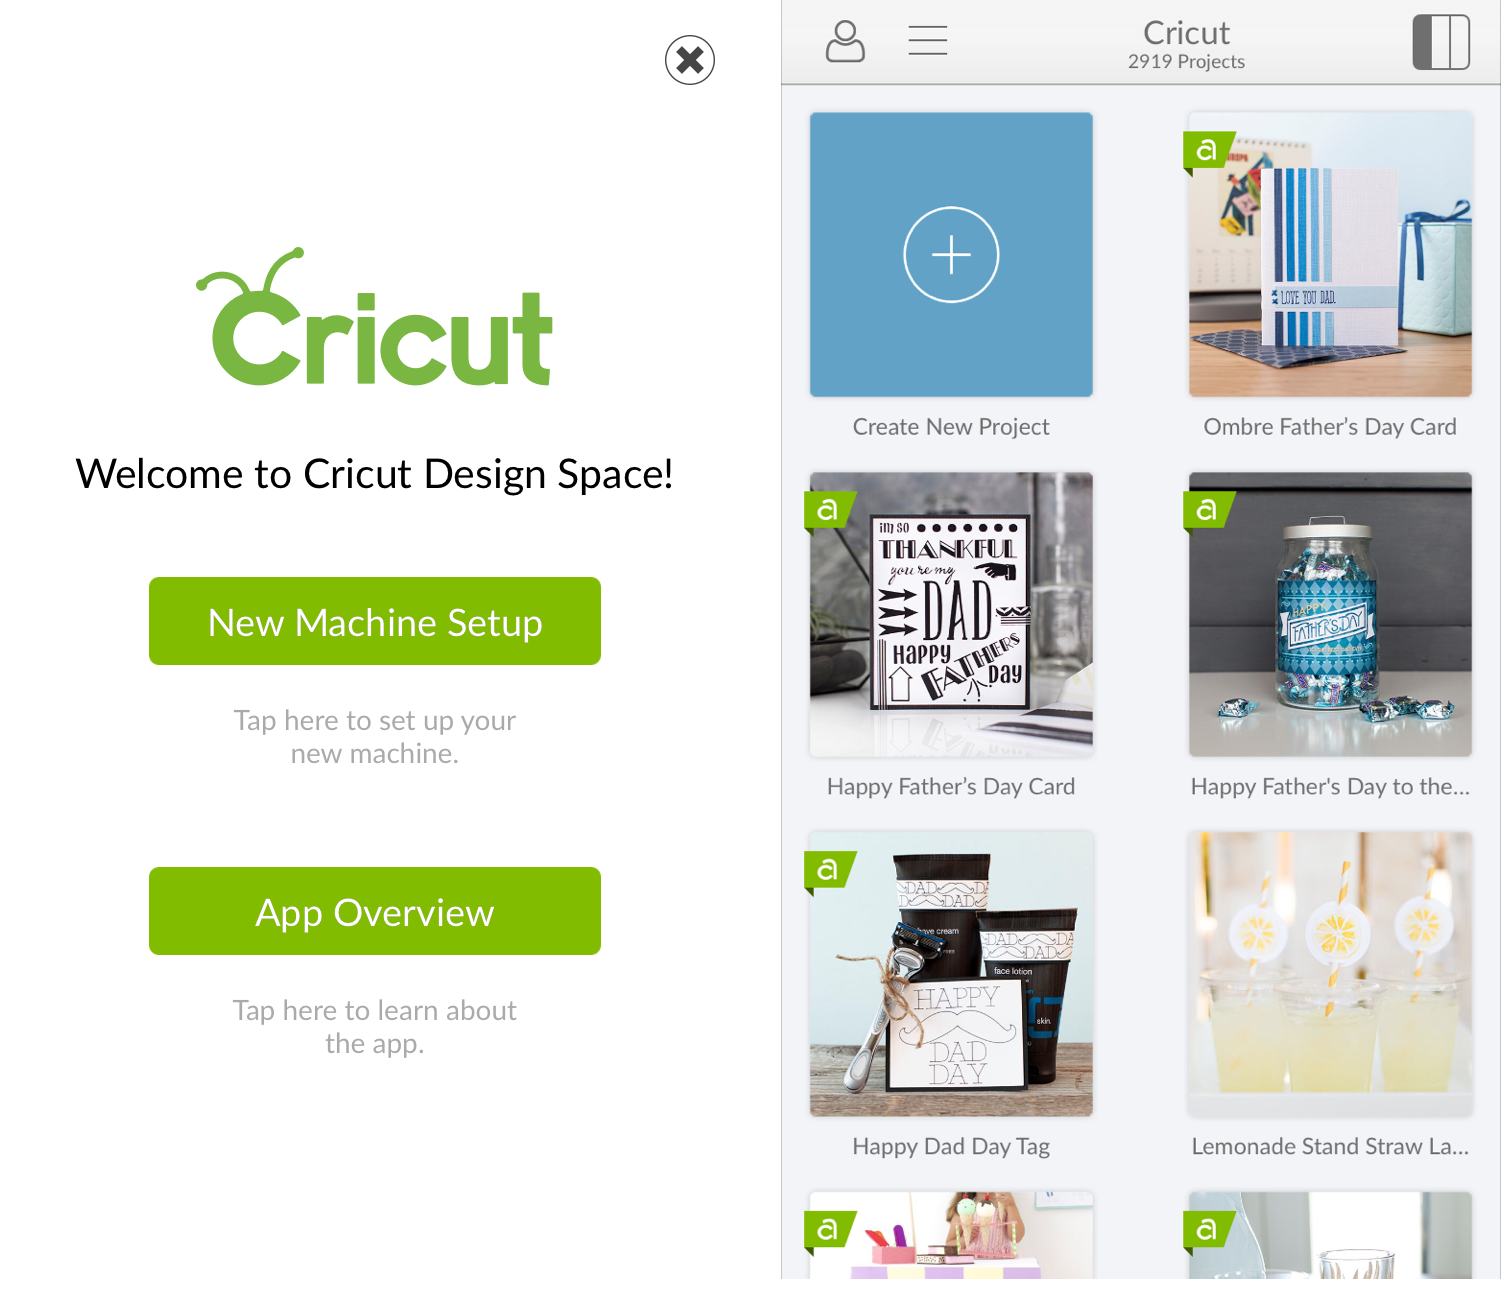 How to download & Install Cricut Application software